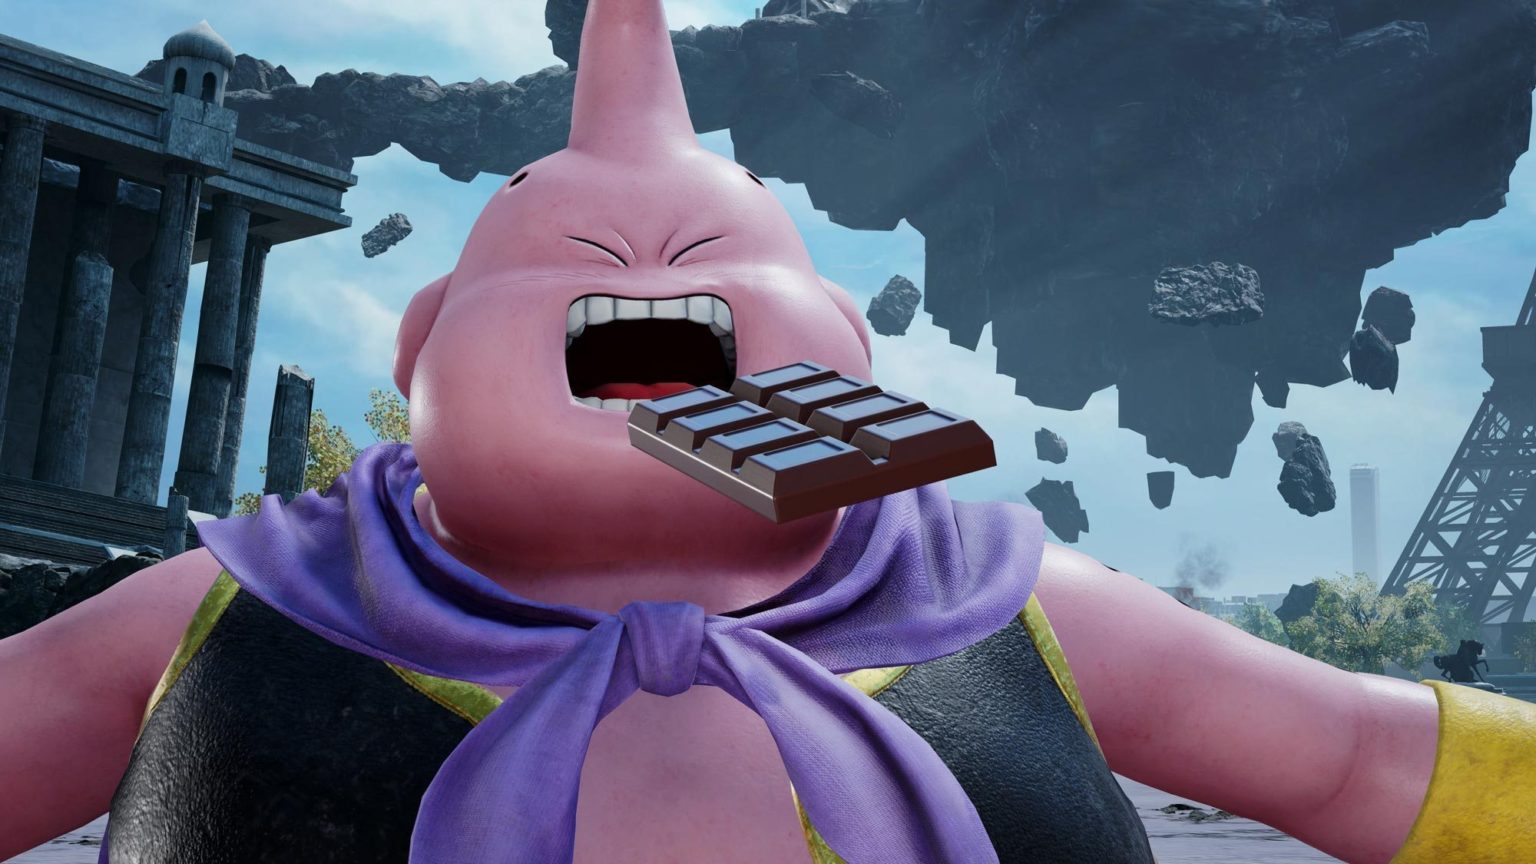 Majin Buu from the Dragon Ball Z series appearing as DLC in Jump Force